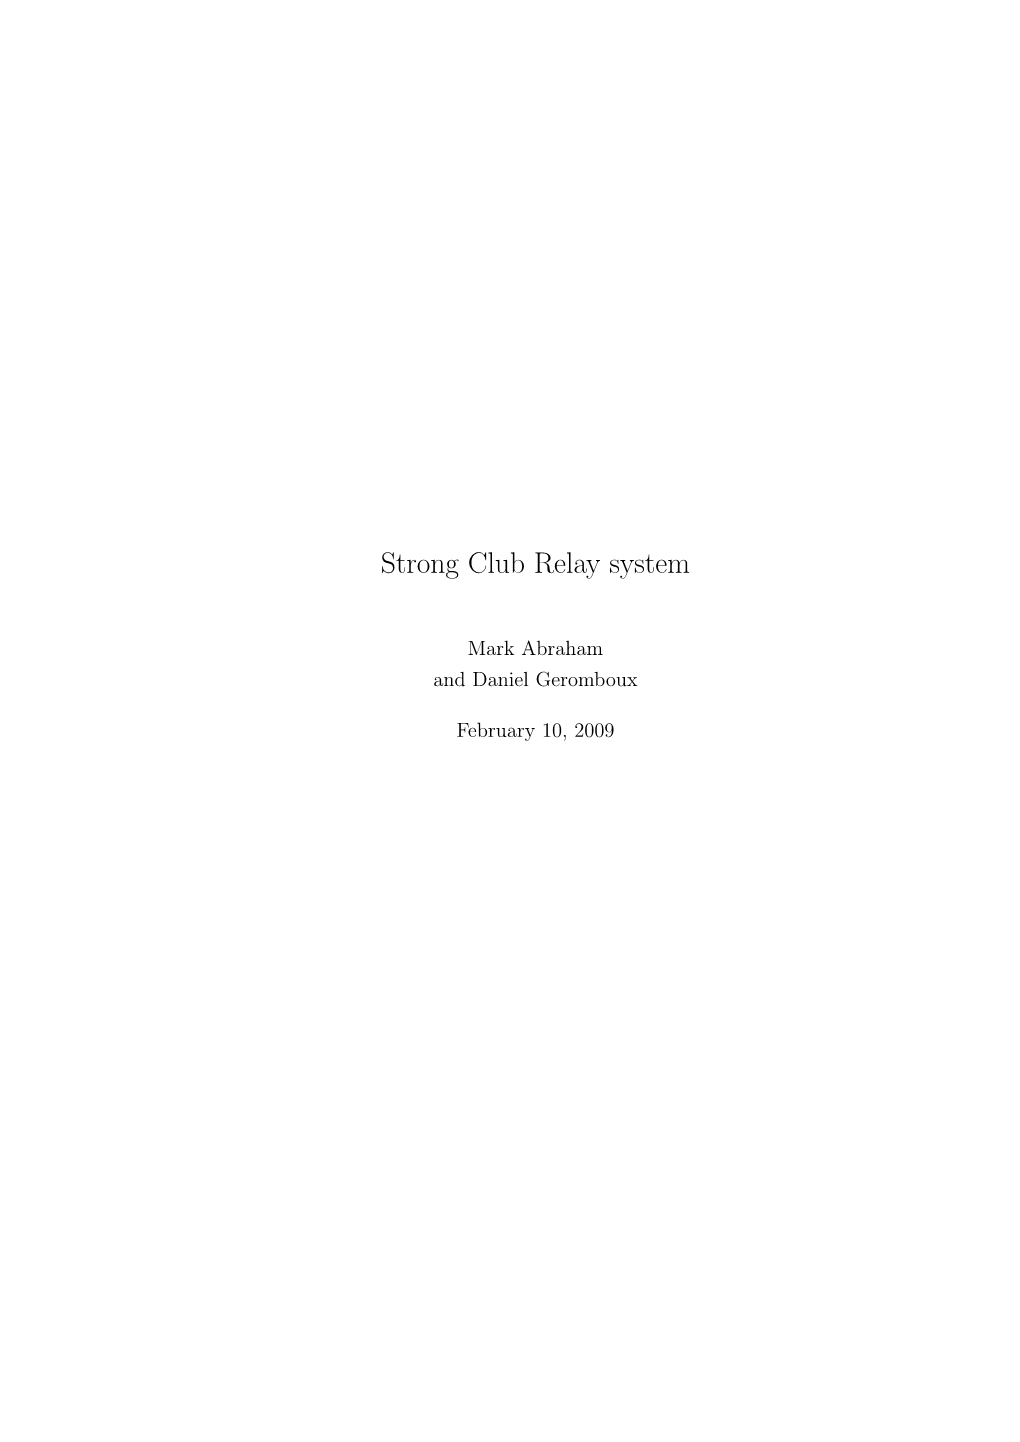 Strong Club Relay System